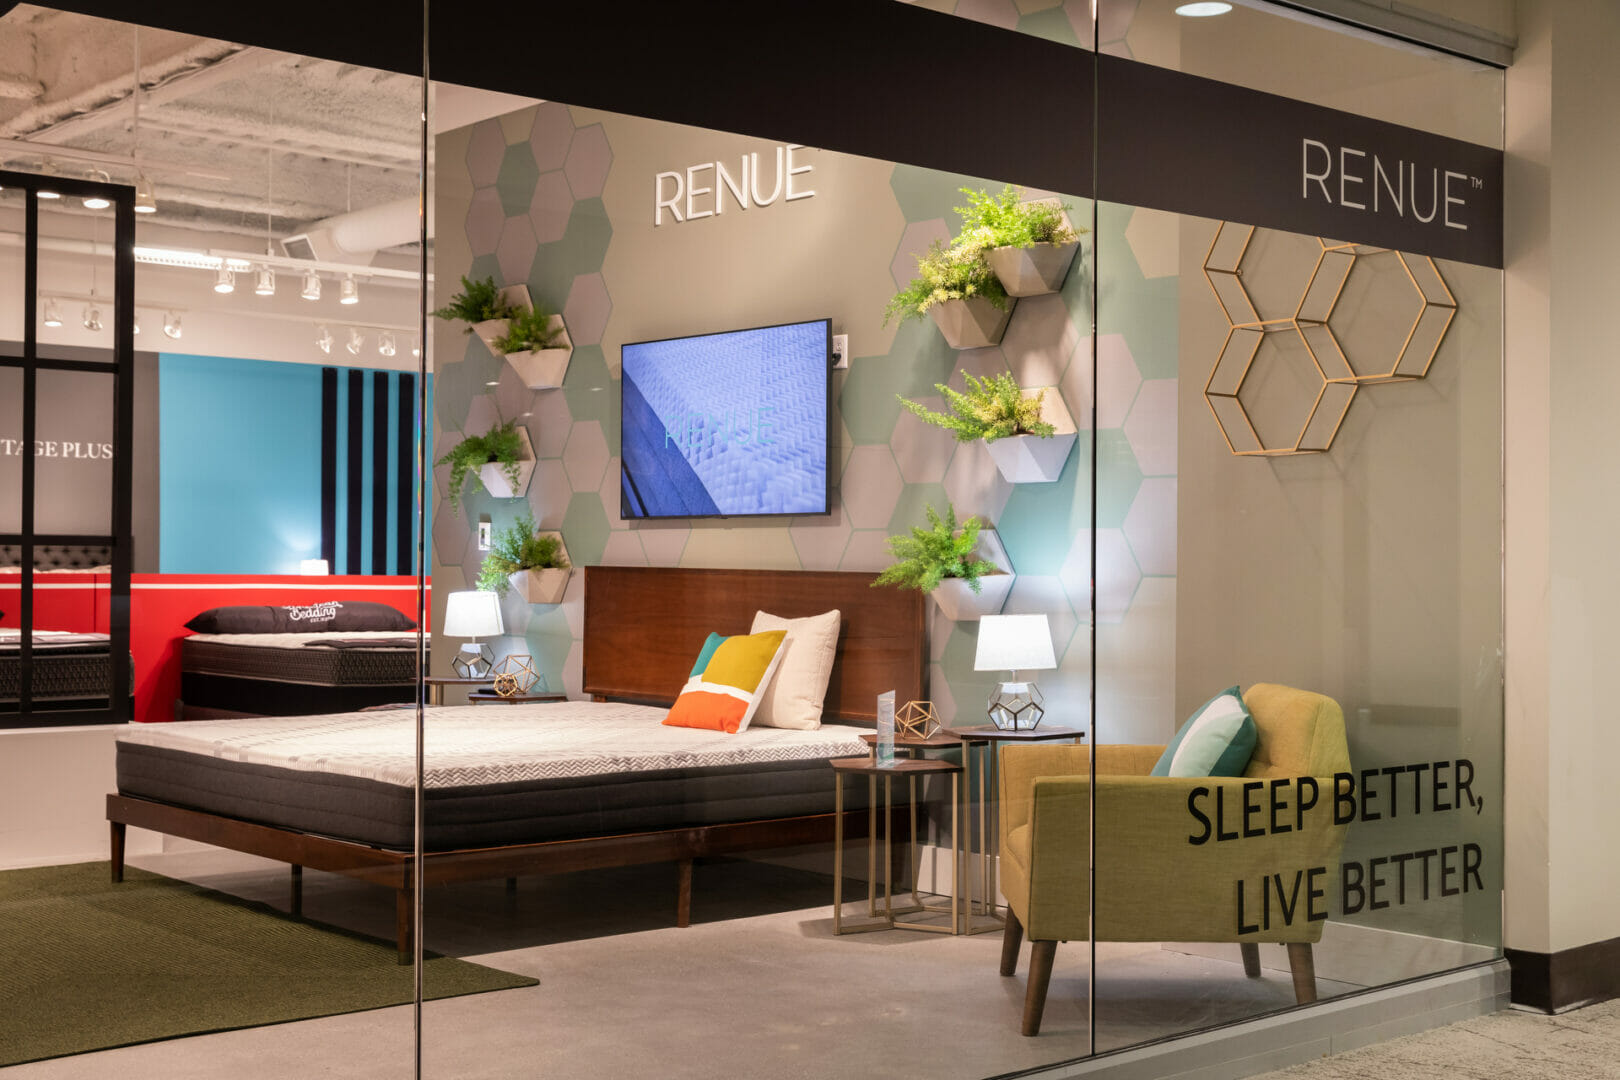 The Latest Trends in Retail Design